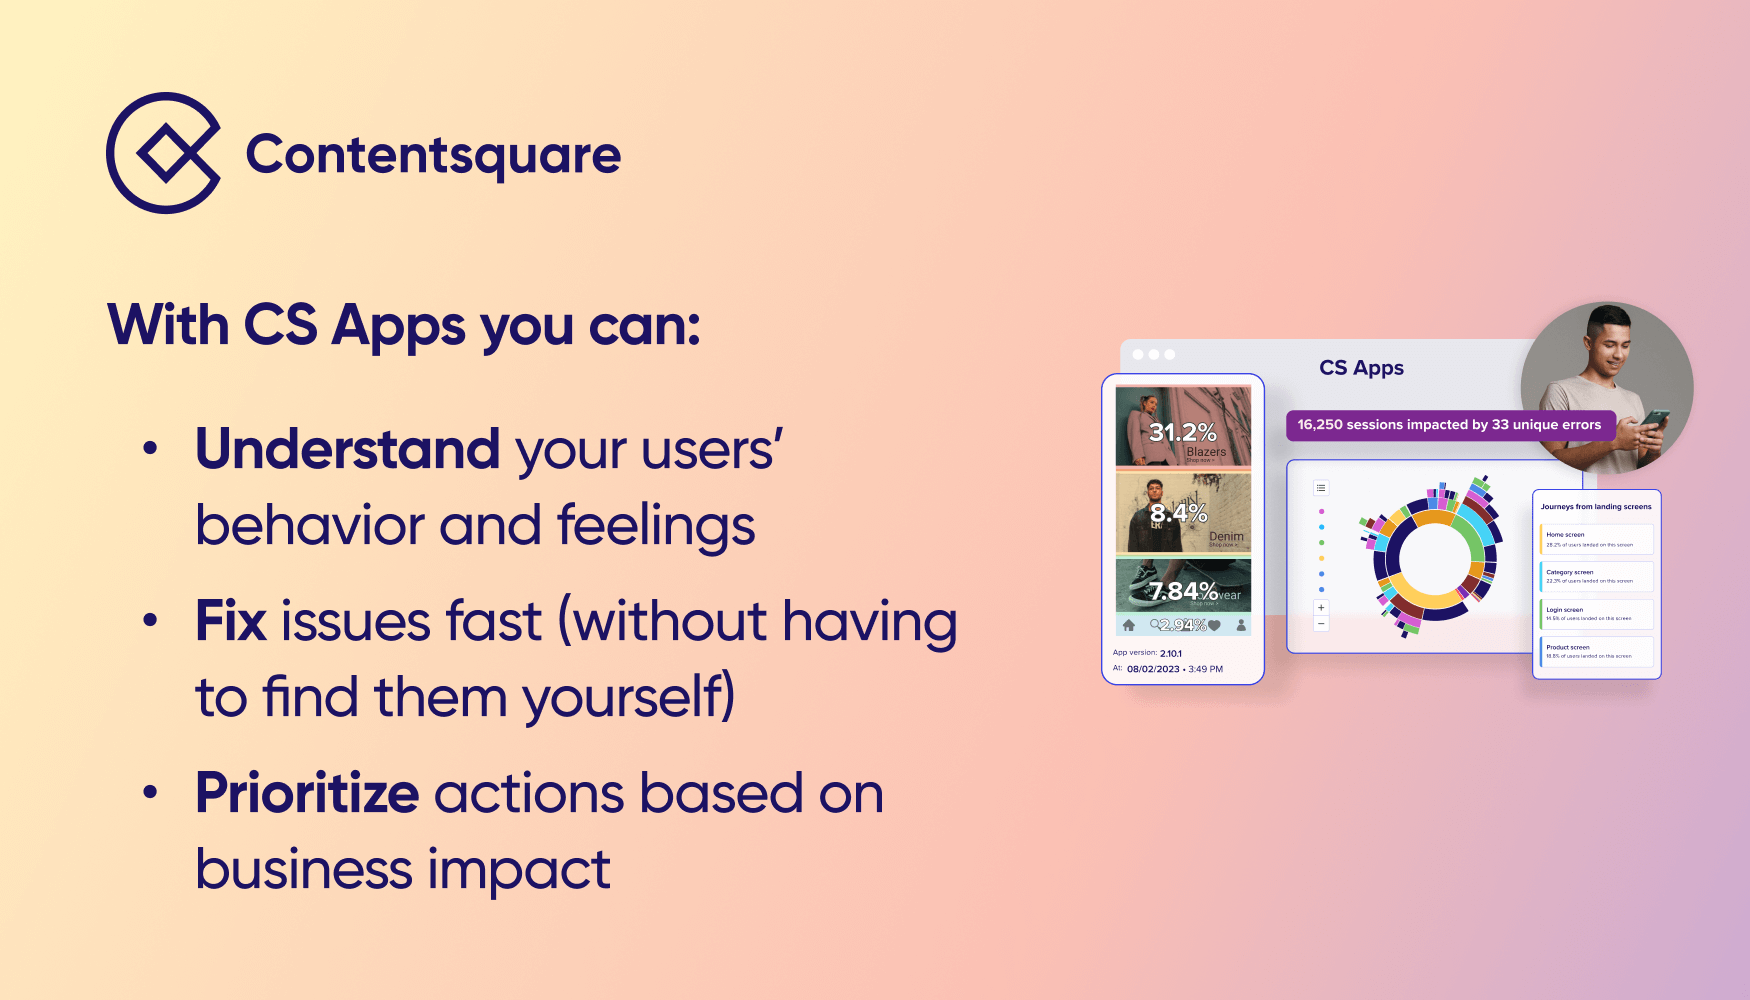 How CS Apps helps you create a flawless mobile app user experience: Understand your users' behavior and feelings, fix issues fast (without having to find them yourself), prioritize actions based on business impact